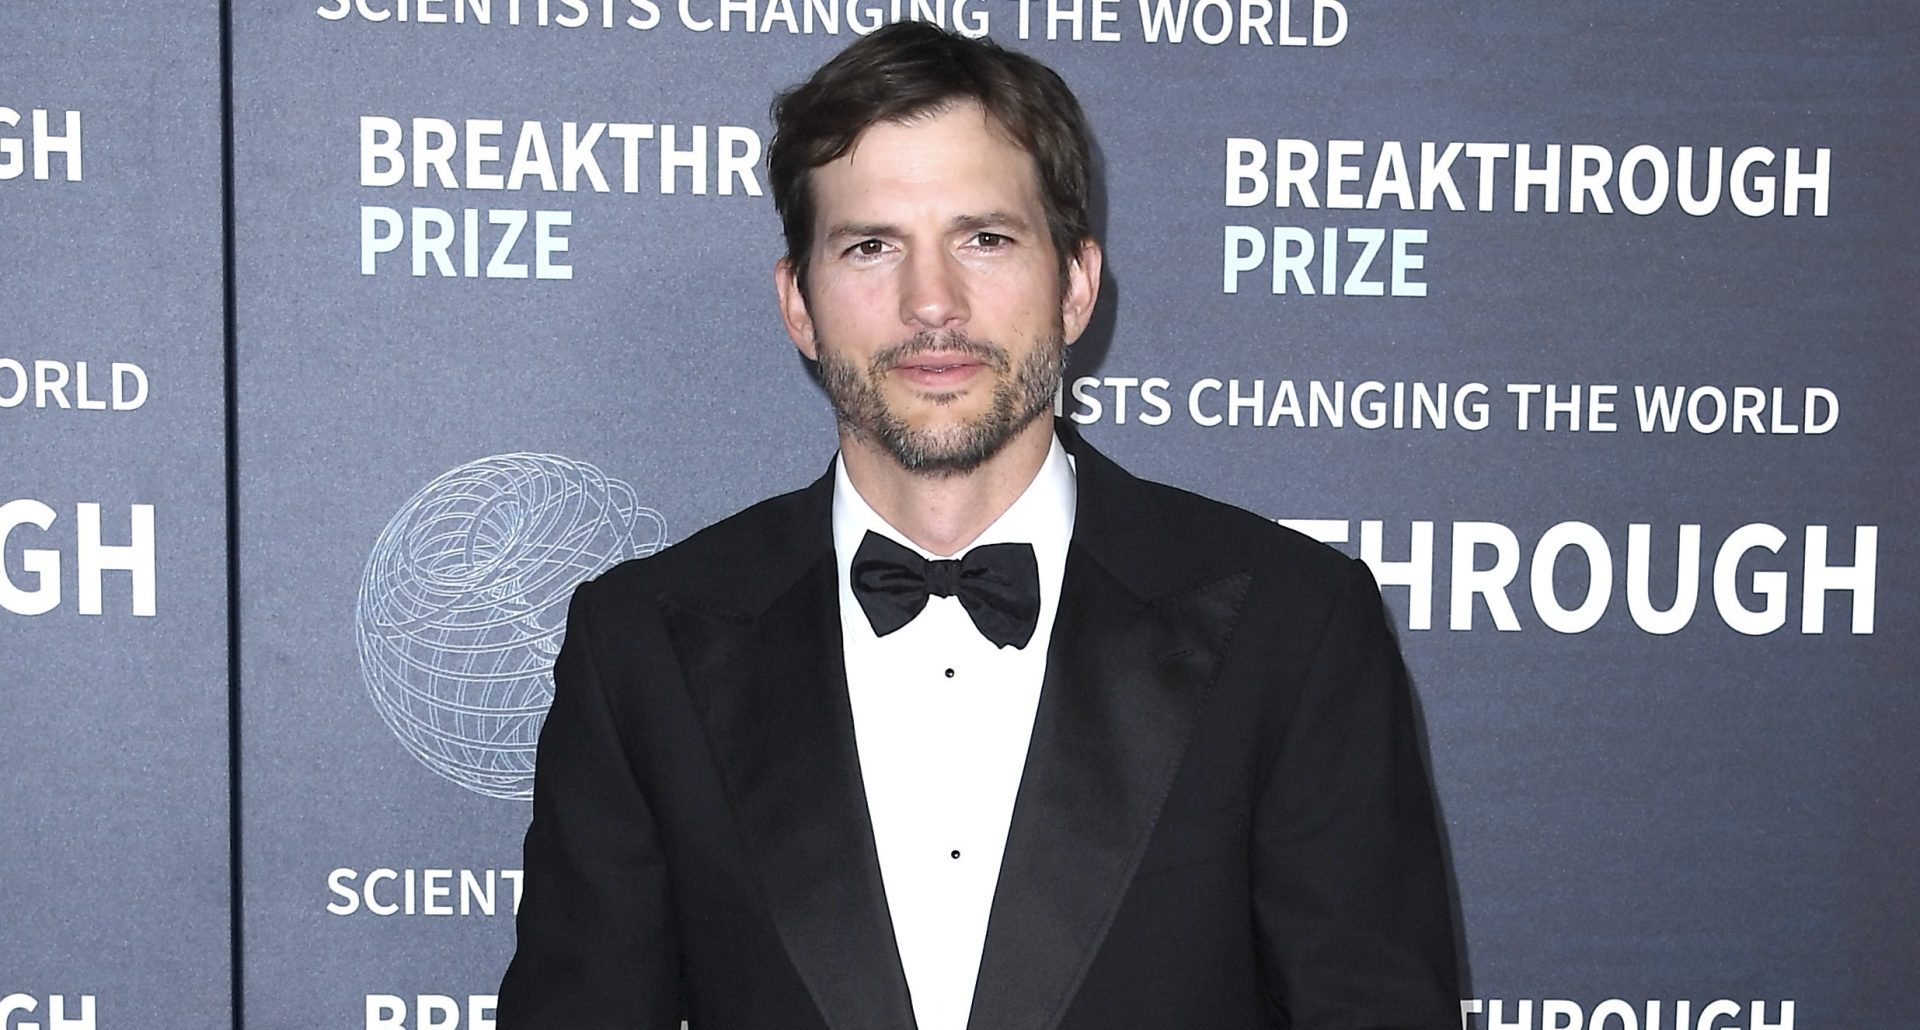 Ashton Kutcher Calls Vouching For Danny Masterson An 'Error In Judgment,' Resigns From Anti-Child-Sex-Abuse Organization